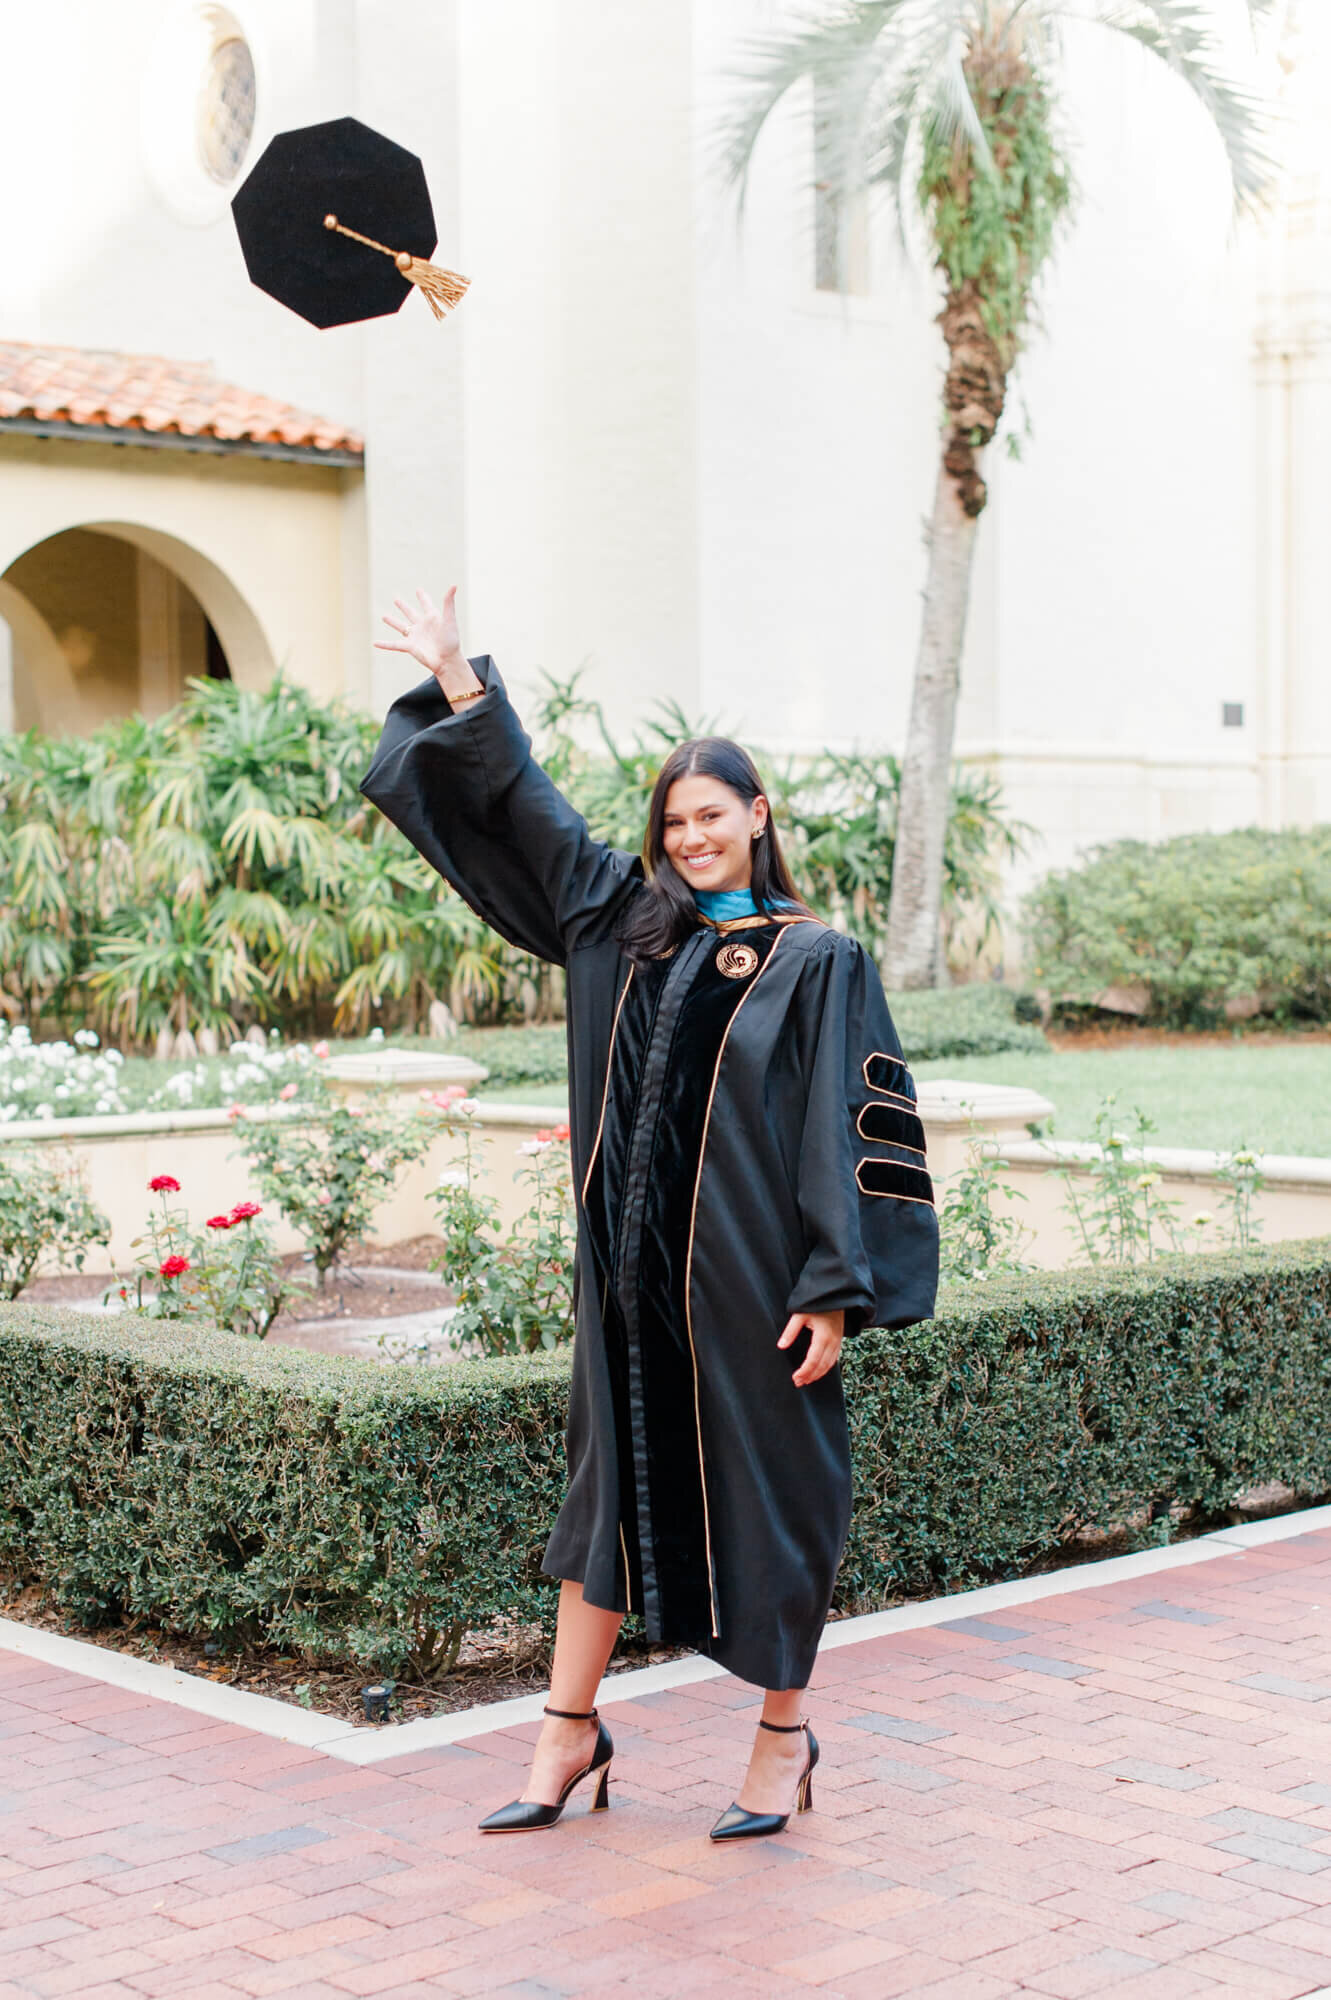 Senior girl standing in her gown throwing her cap at Rollins College during her senior photographer session